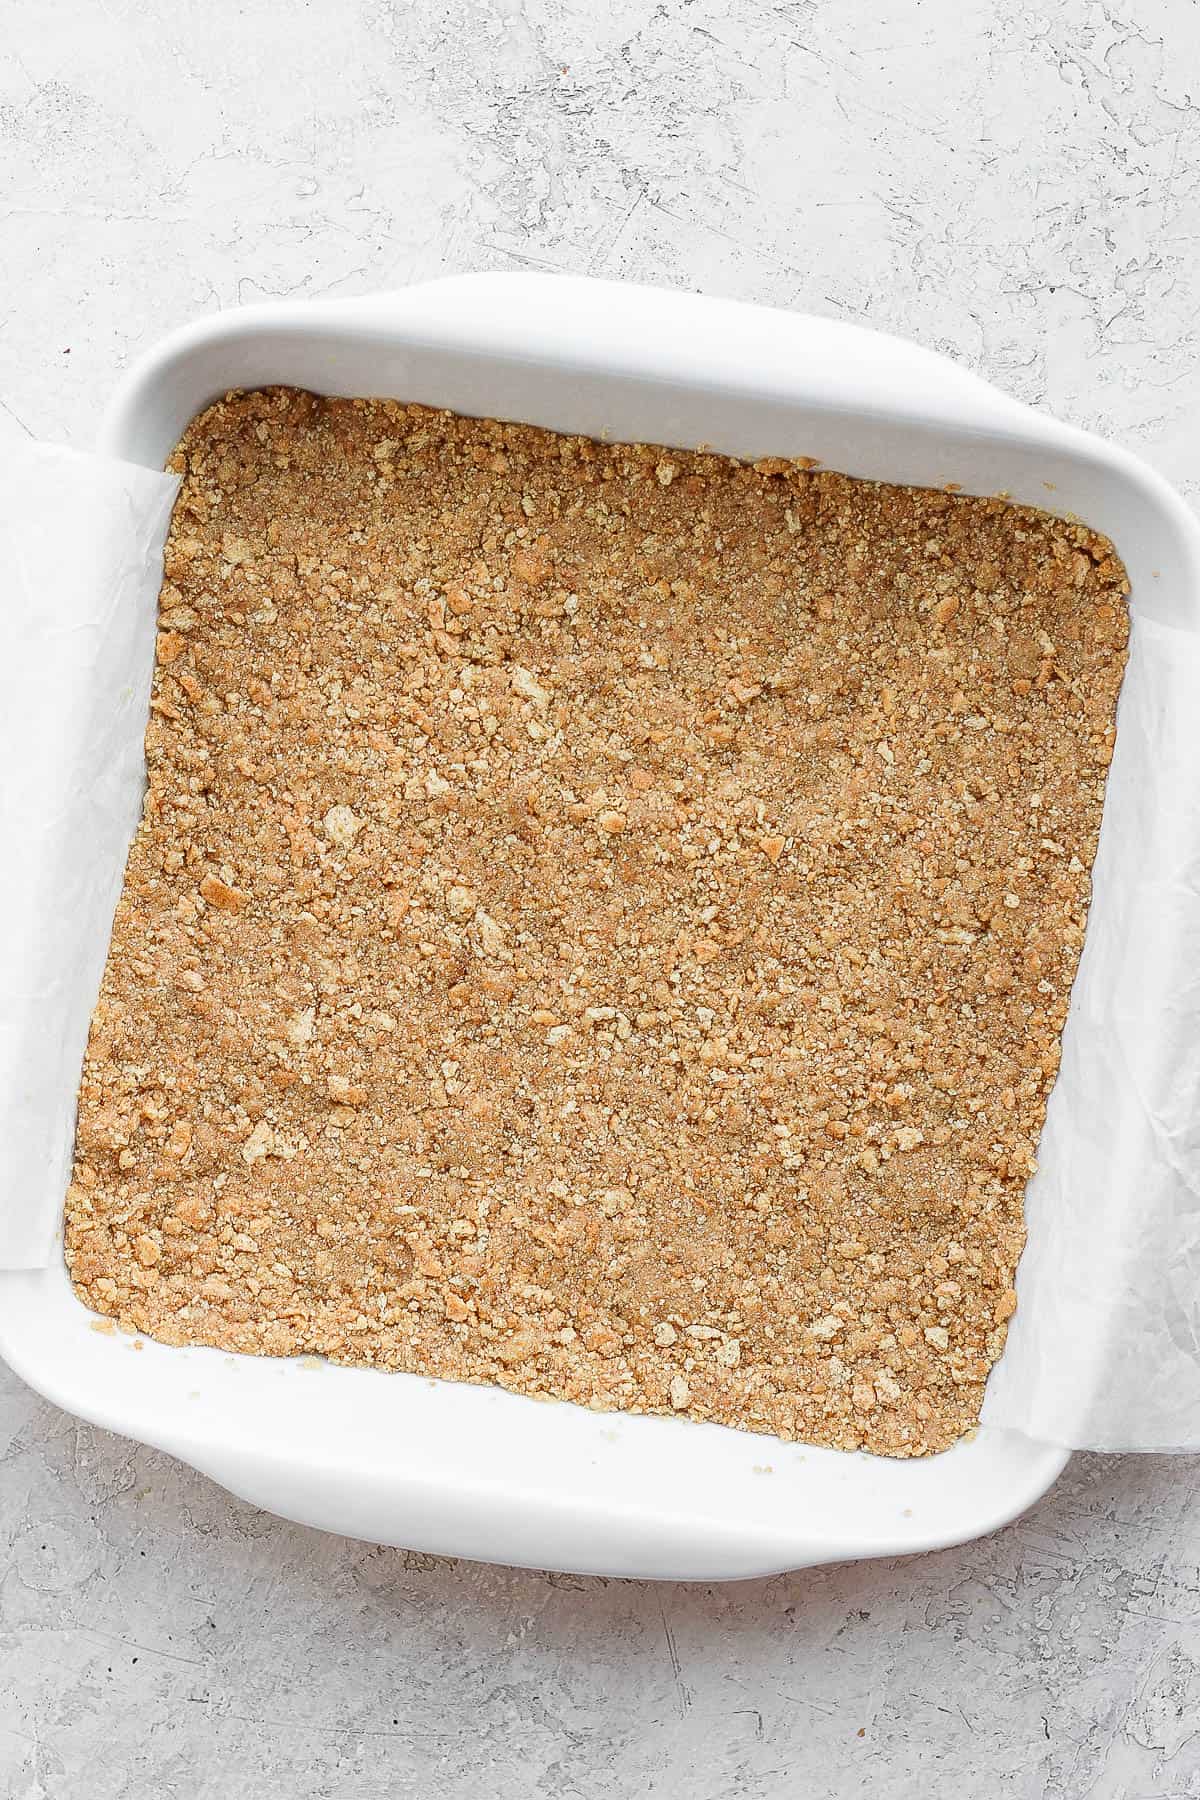 Graham cracker crust in a parchment-lined pan.